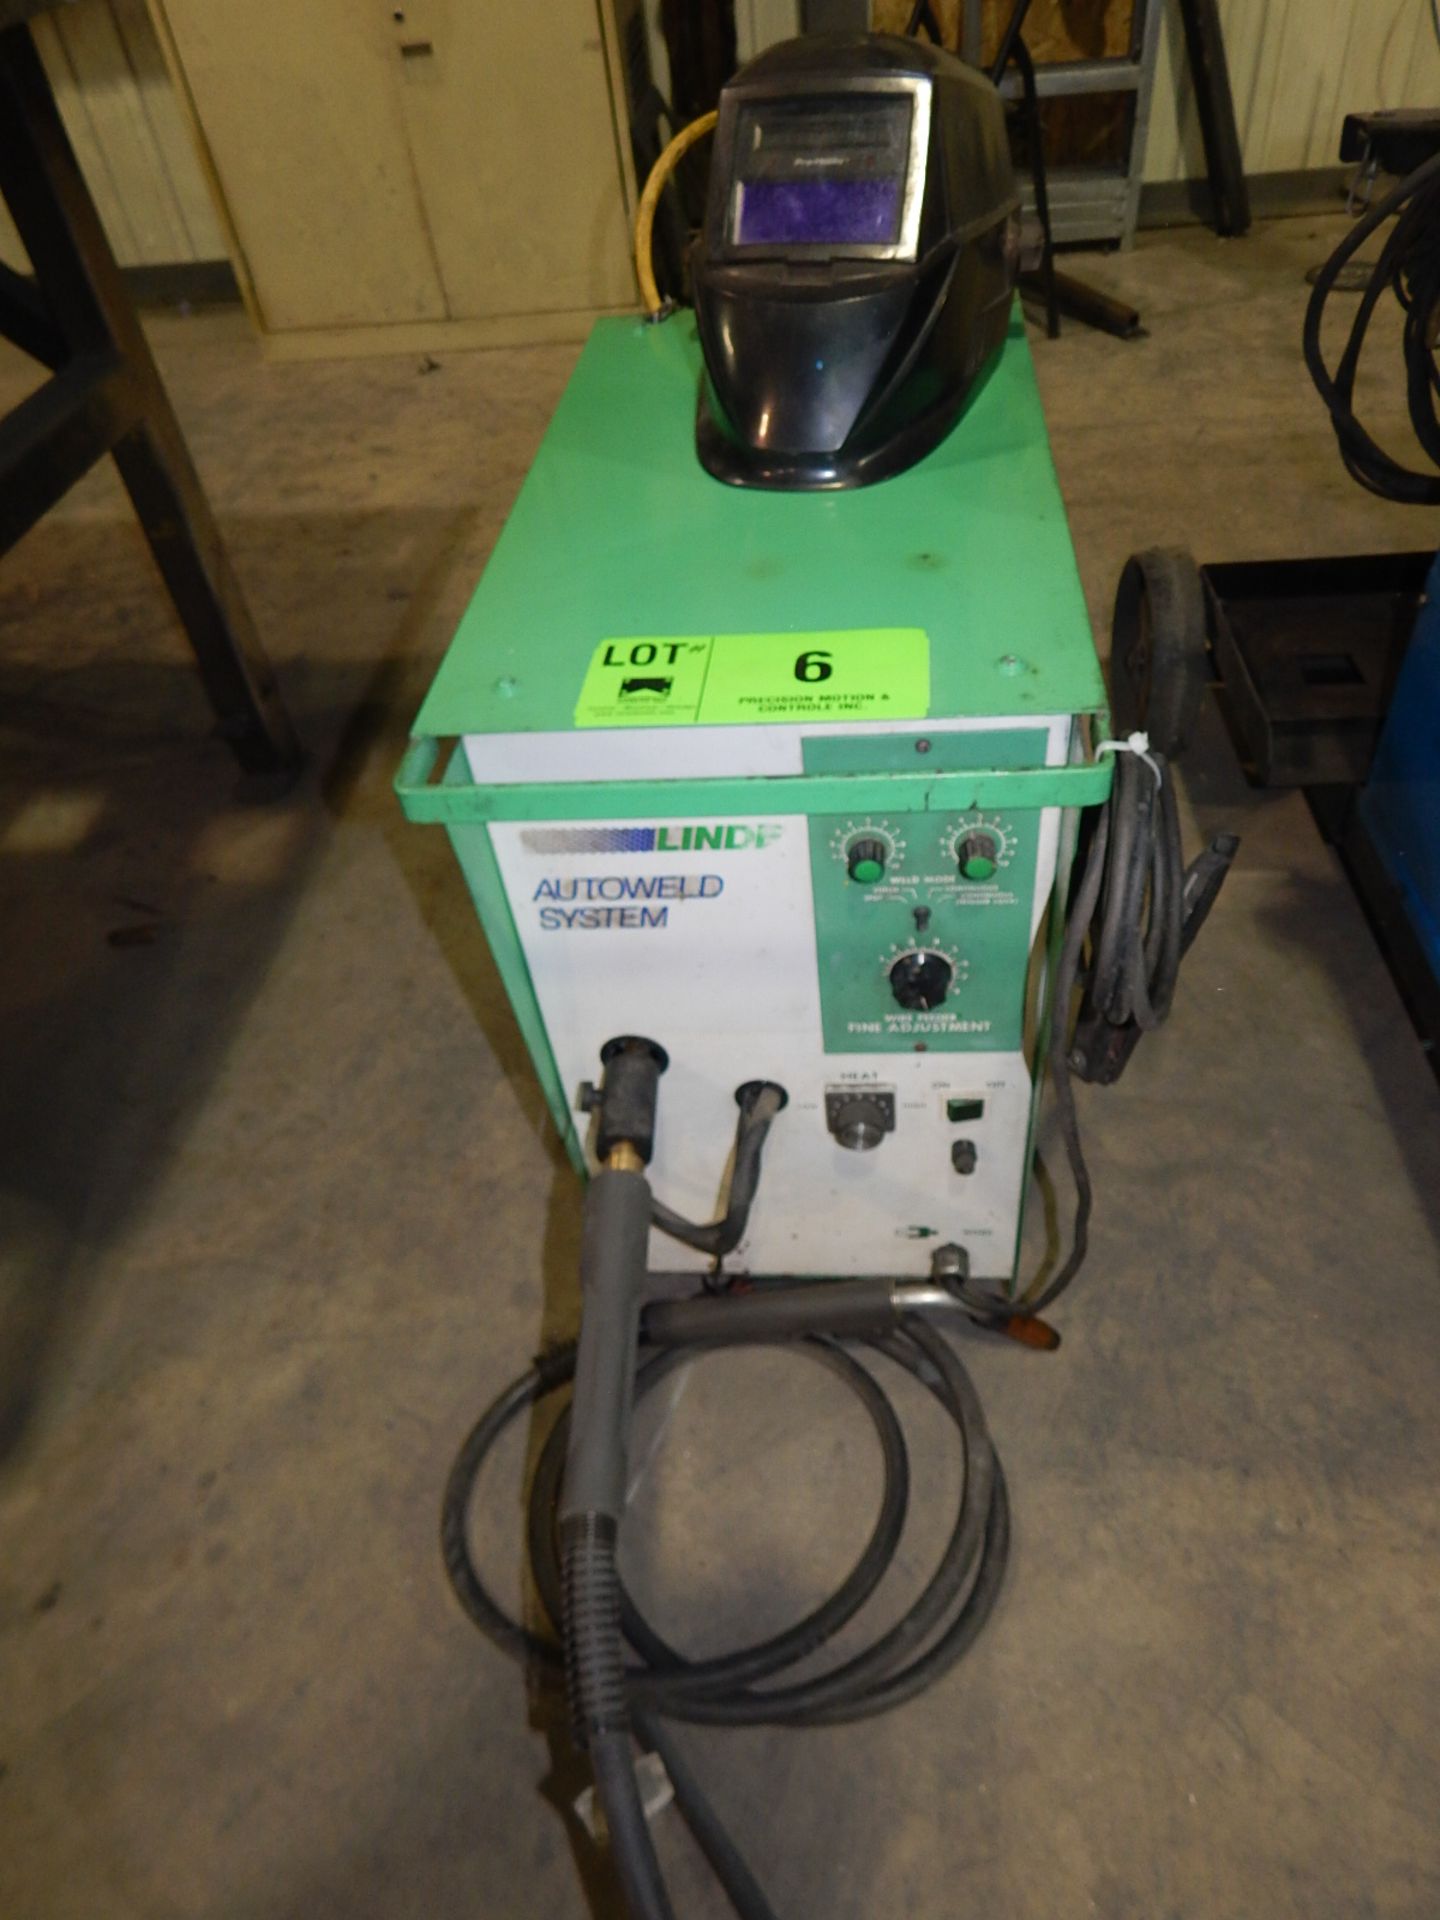 LINDE AUTO WELD SYSTEM WELDING POWER SUPPLY, S/N: N/A